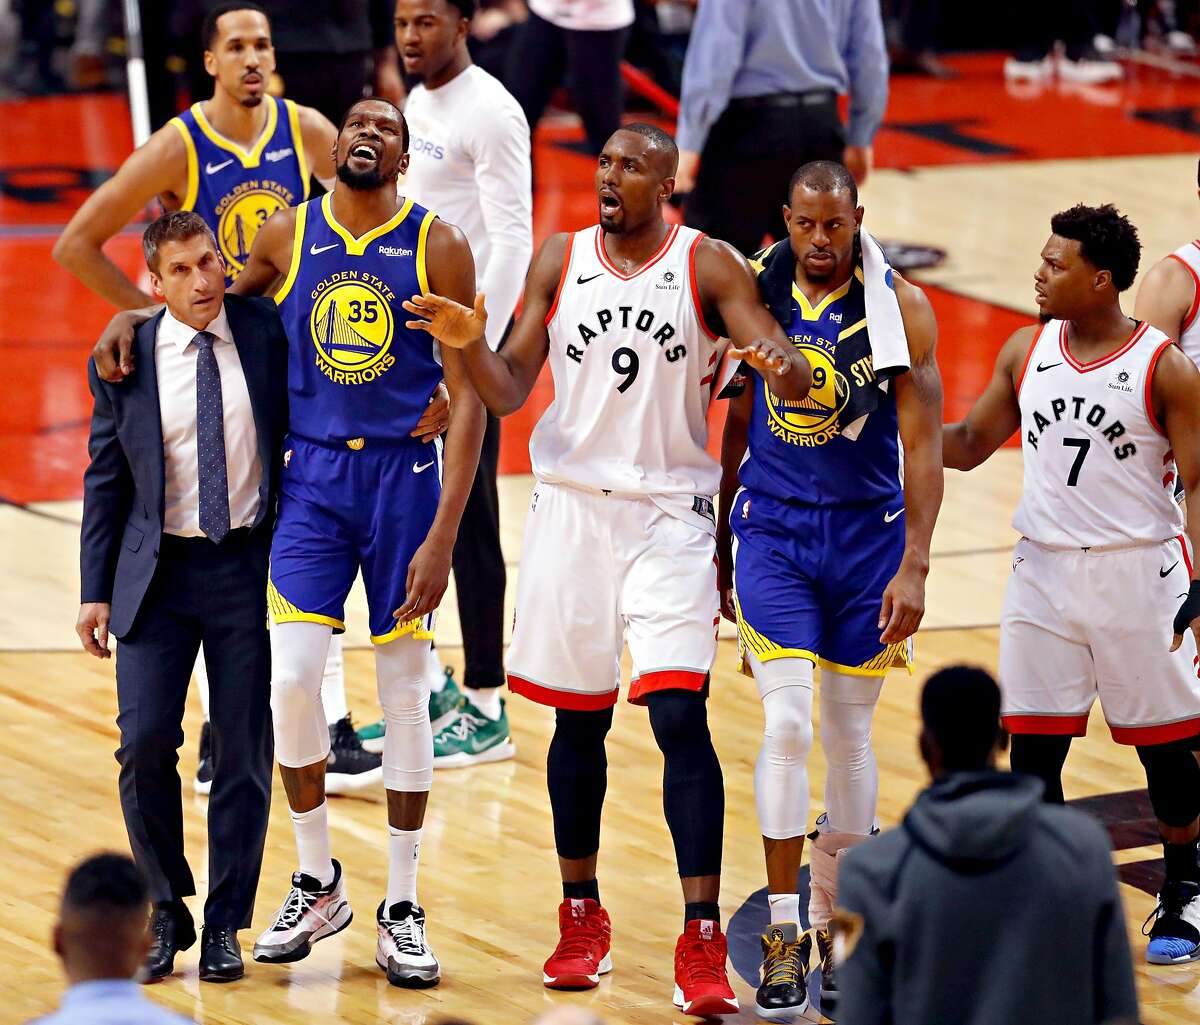 Golden State Warriors� Kevin Durant is helped off the court by the team�s director of sports medicine Rick Celebrini as Toronto Raptors� Serge Ibaka signals to the crowd in the first quarter during game 5 of the NBA Finals between the Golden State Warriors and the Toronto Raptors at Scotiabank Arena on Monday, June 10, 2019 in Toronto, Ontario, Canada.